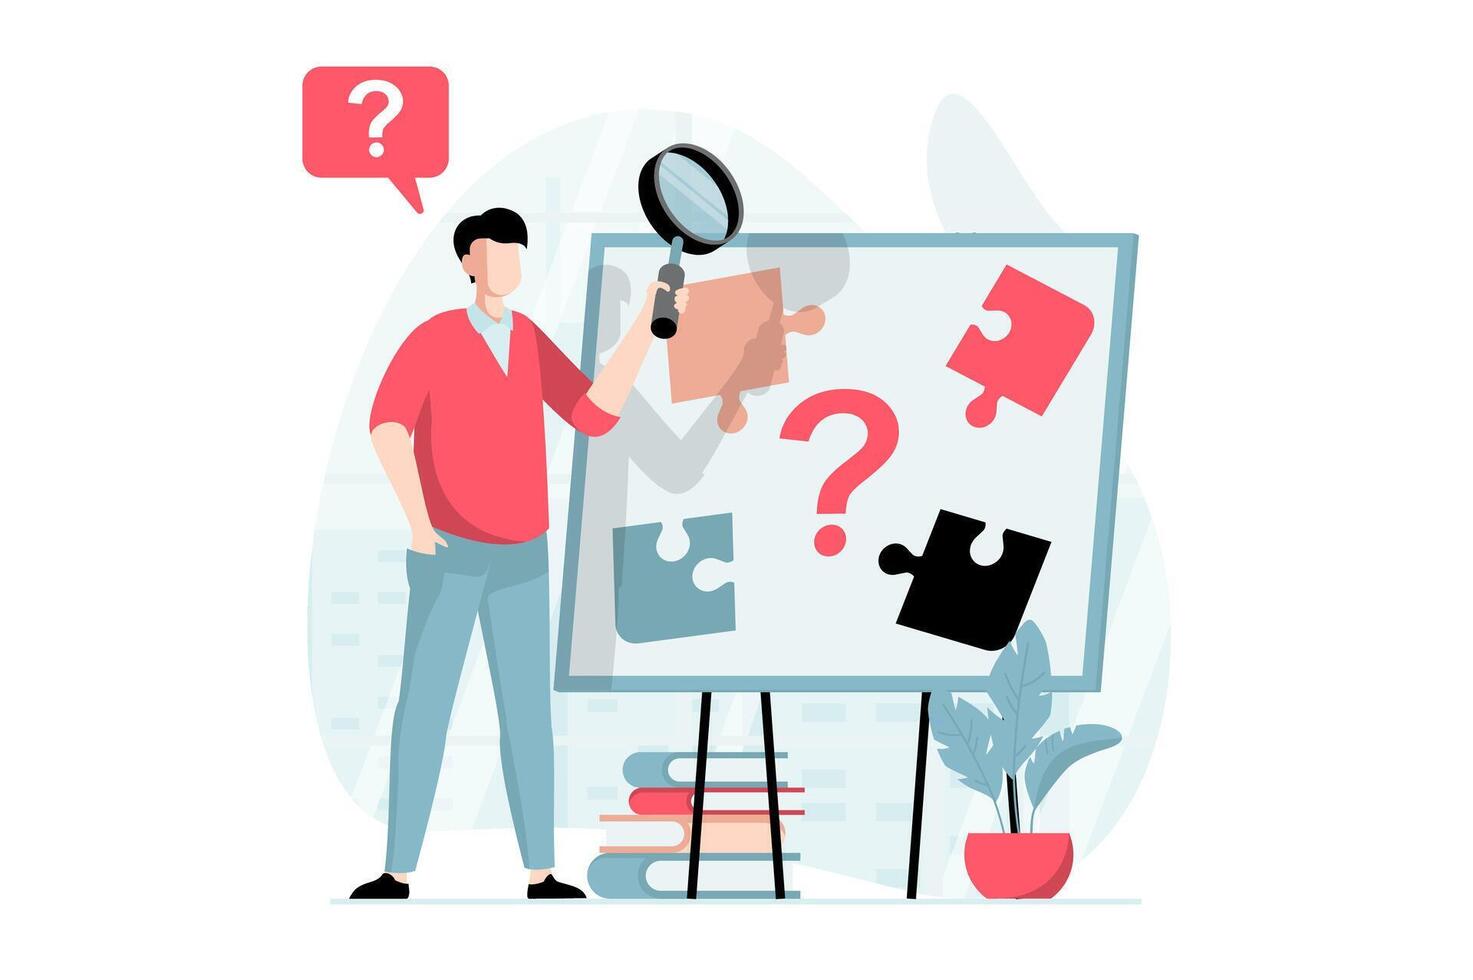 Finding solution concept with people scene in flat design. Man with magnifier examines problem, assembles puzzle, solves jigsaw and finds answers. illustration with character situation for web vector